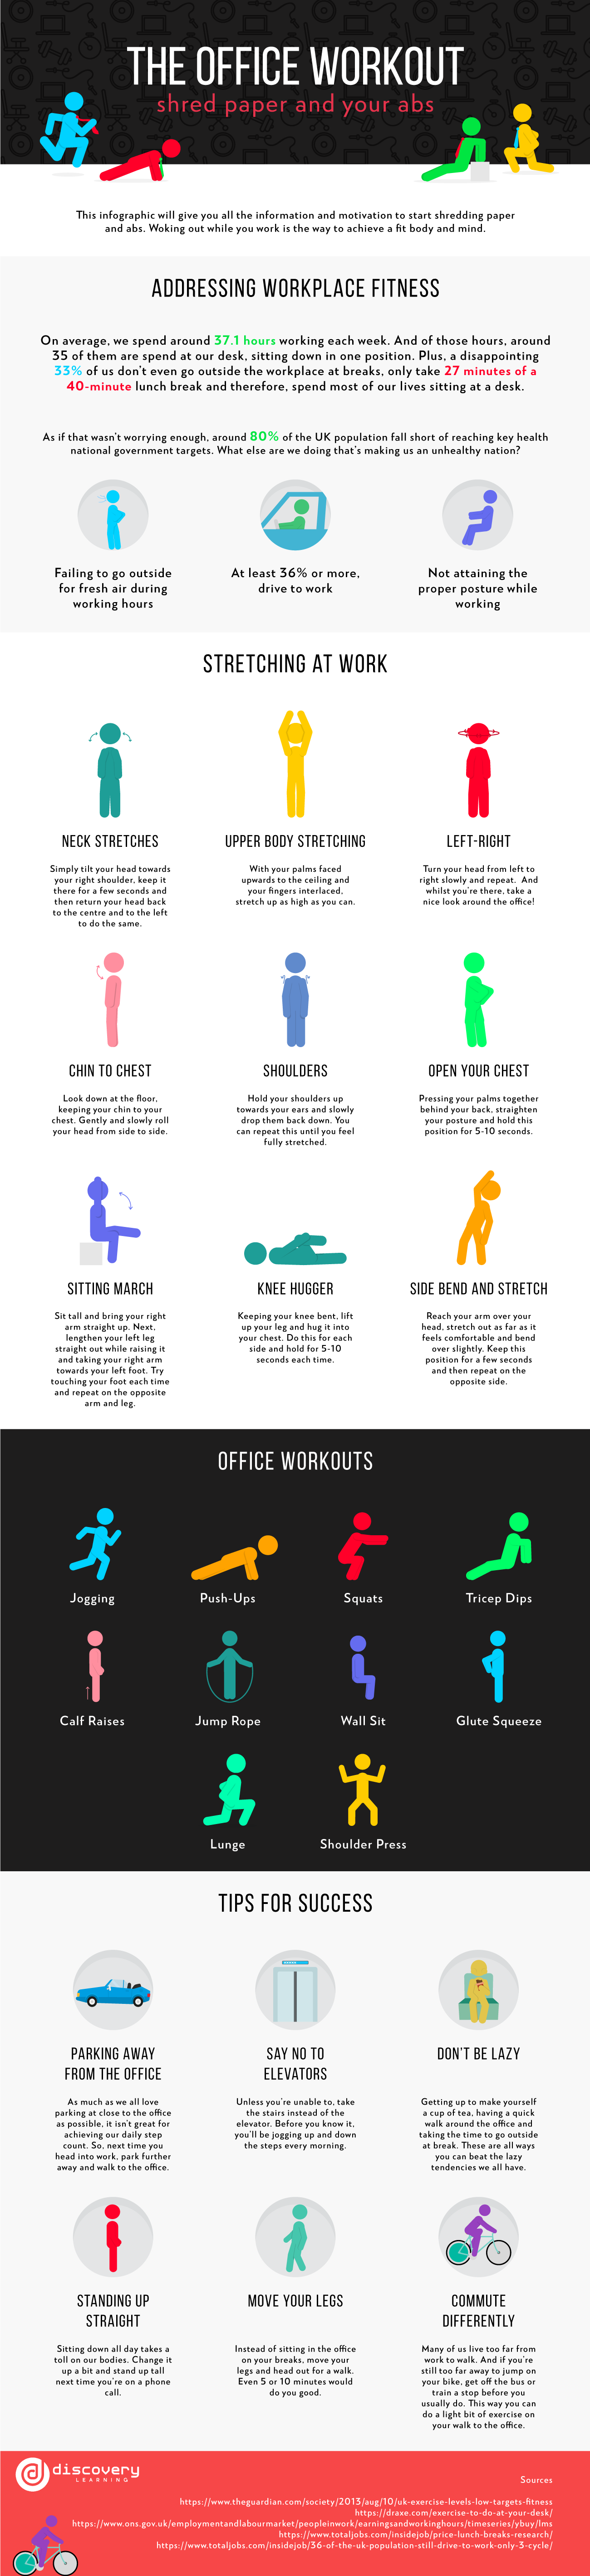 Office_workout_infographic.png